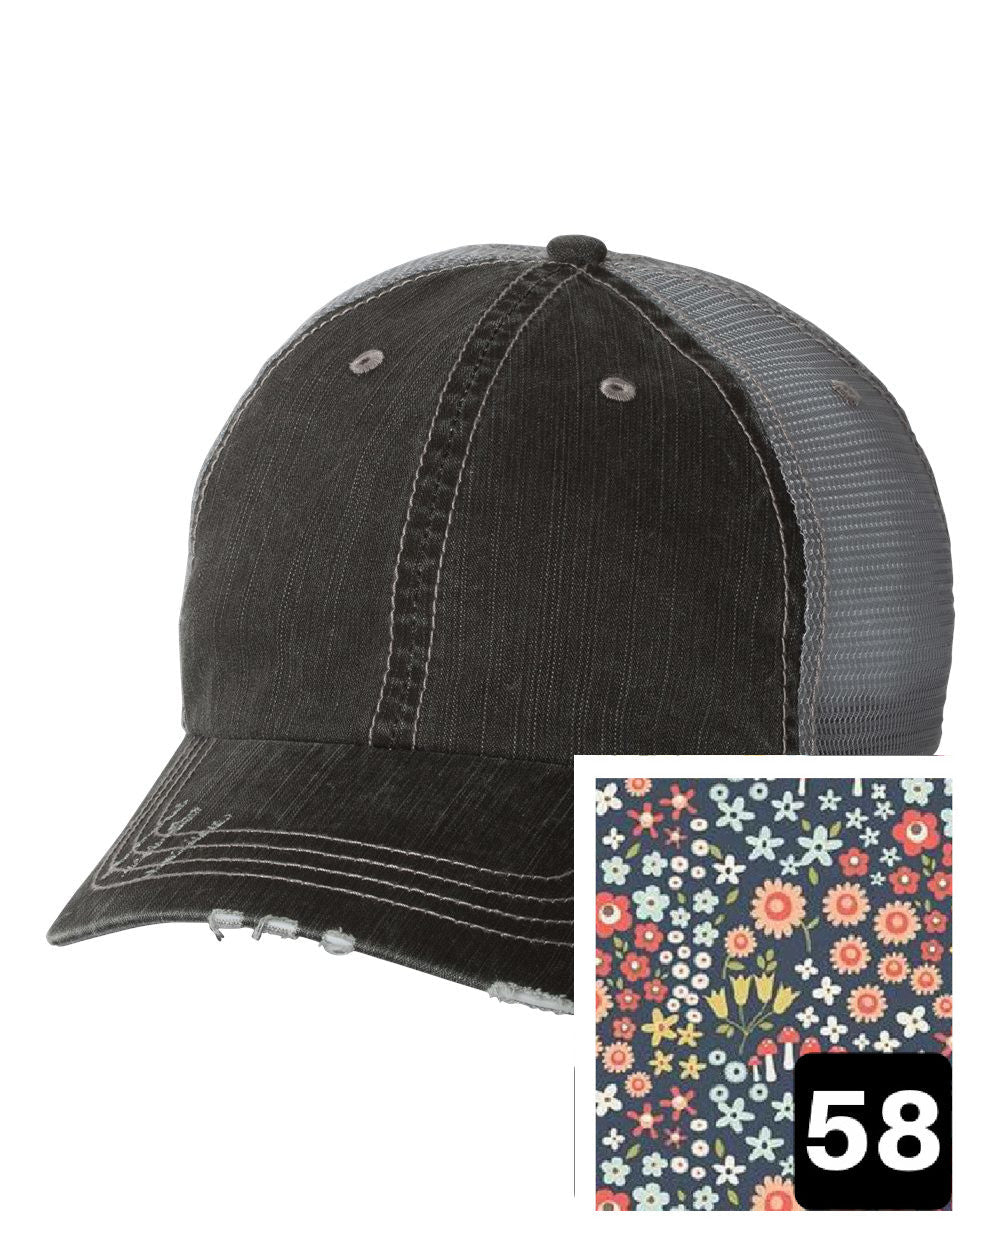 gray distressed trucker hat with white dont on navy fabric state of Georgia